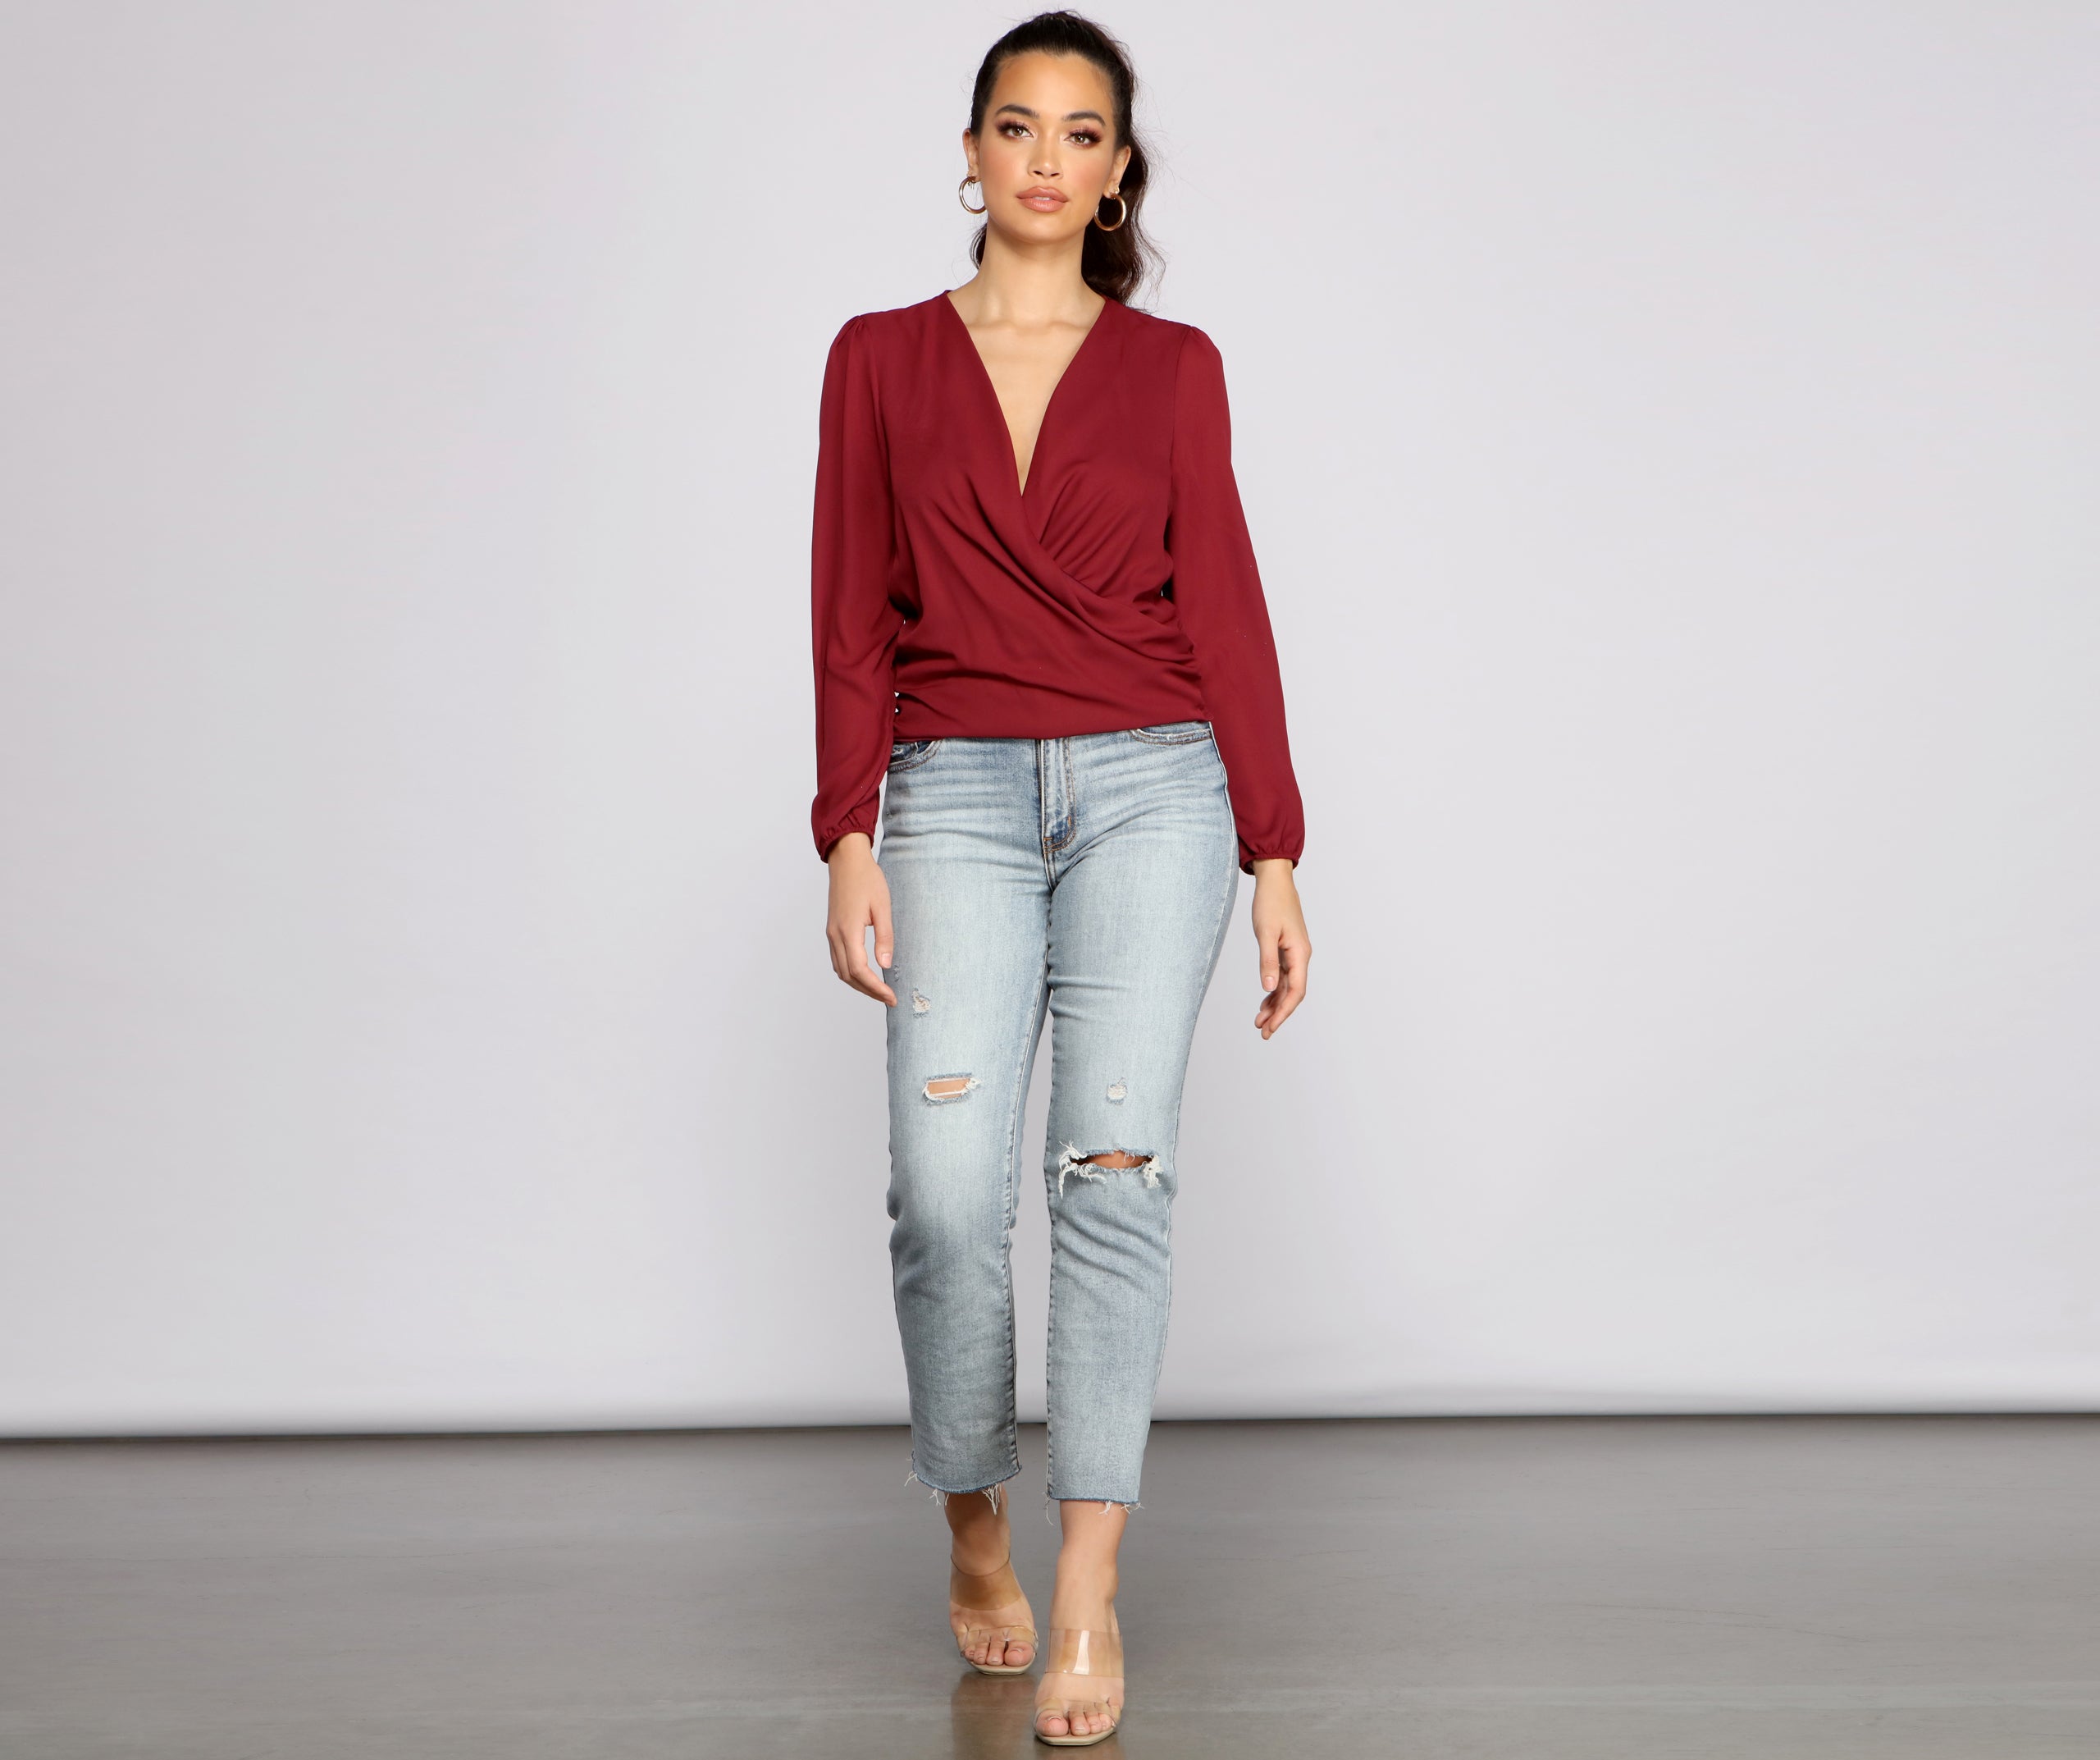 Moment of Luxe Chiffon Surplice Top